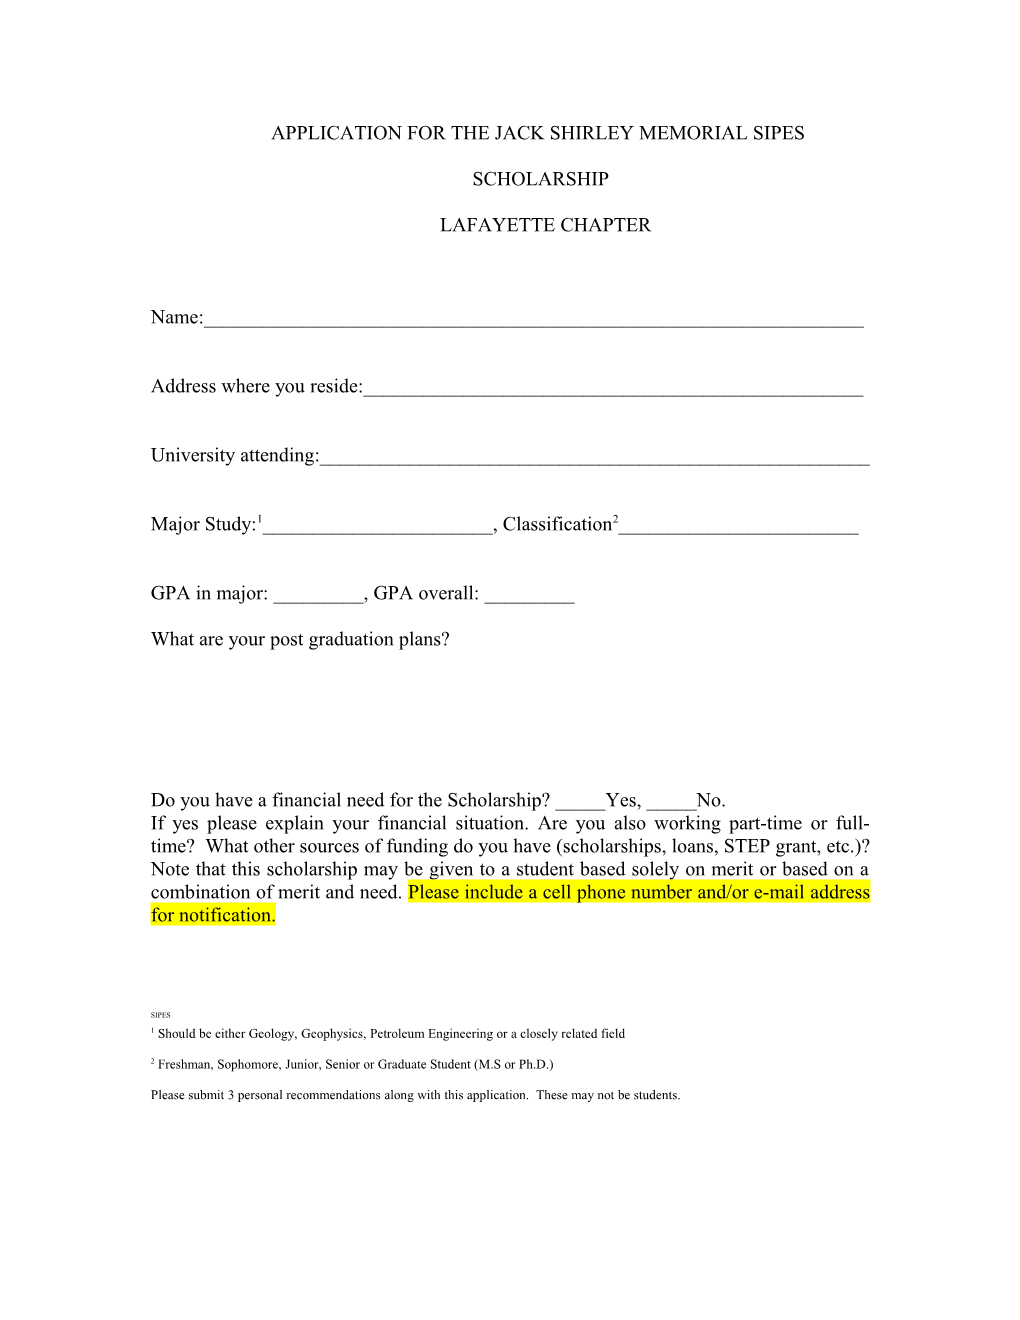 Application for the Jack Shirley Memorial Sipes